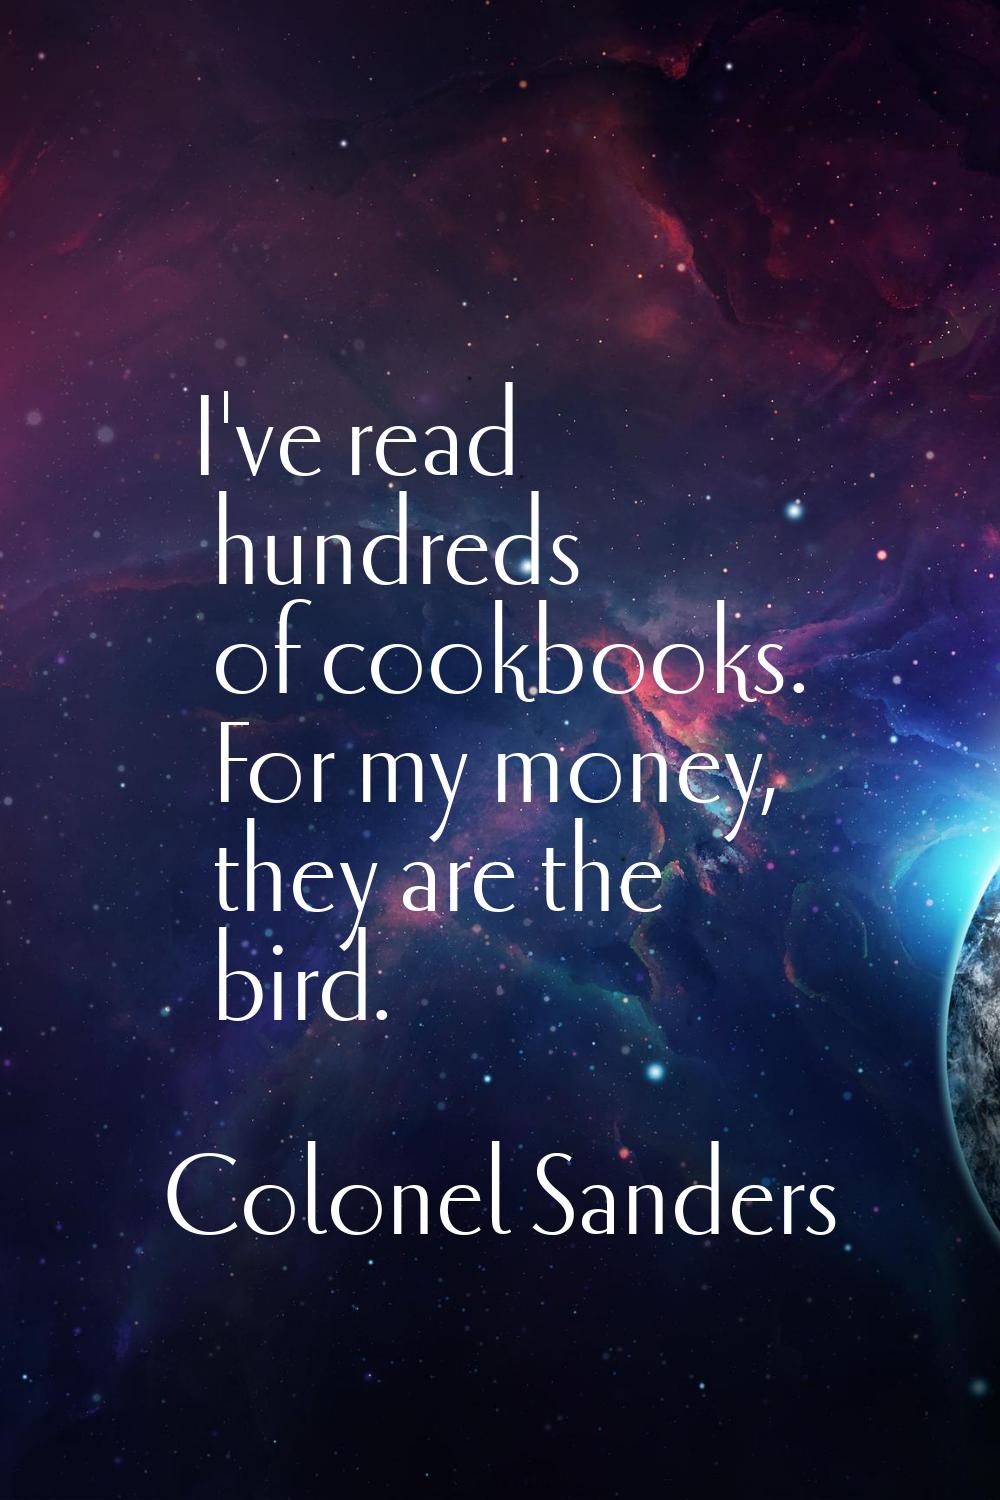 I've read hundreds of cookbooks. For my money, they are the bird.